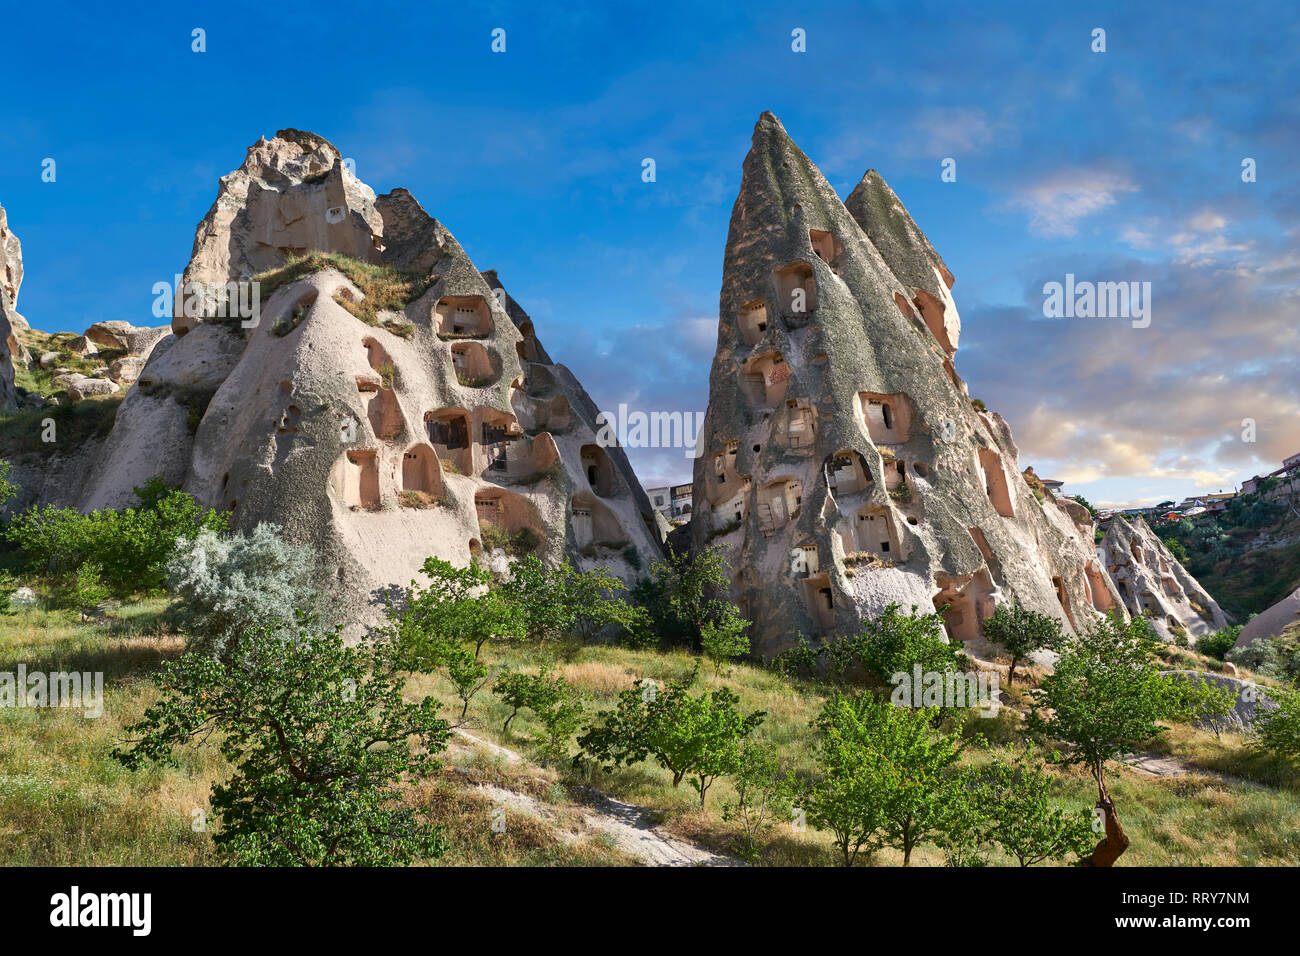 Pictures & images of the cave city houses in the rock formations & fairy chimney of Uchisar, near Goreme, Cappadocia, Nevsehir, Turkey Stock Photo